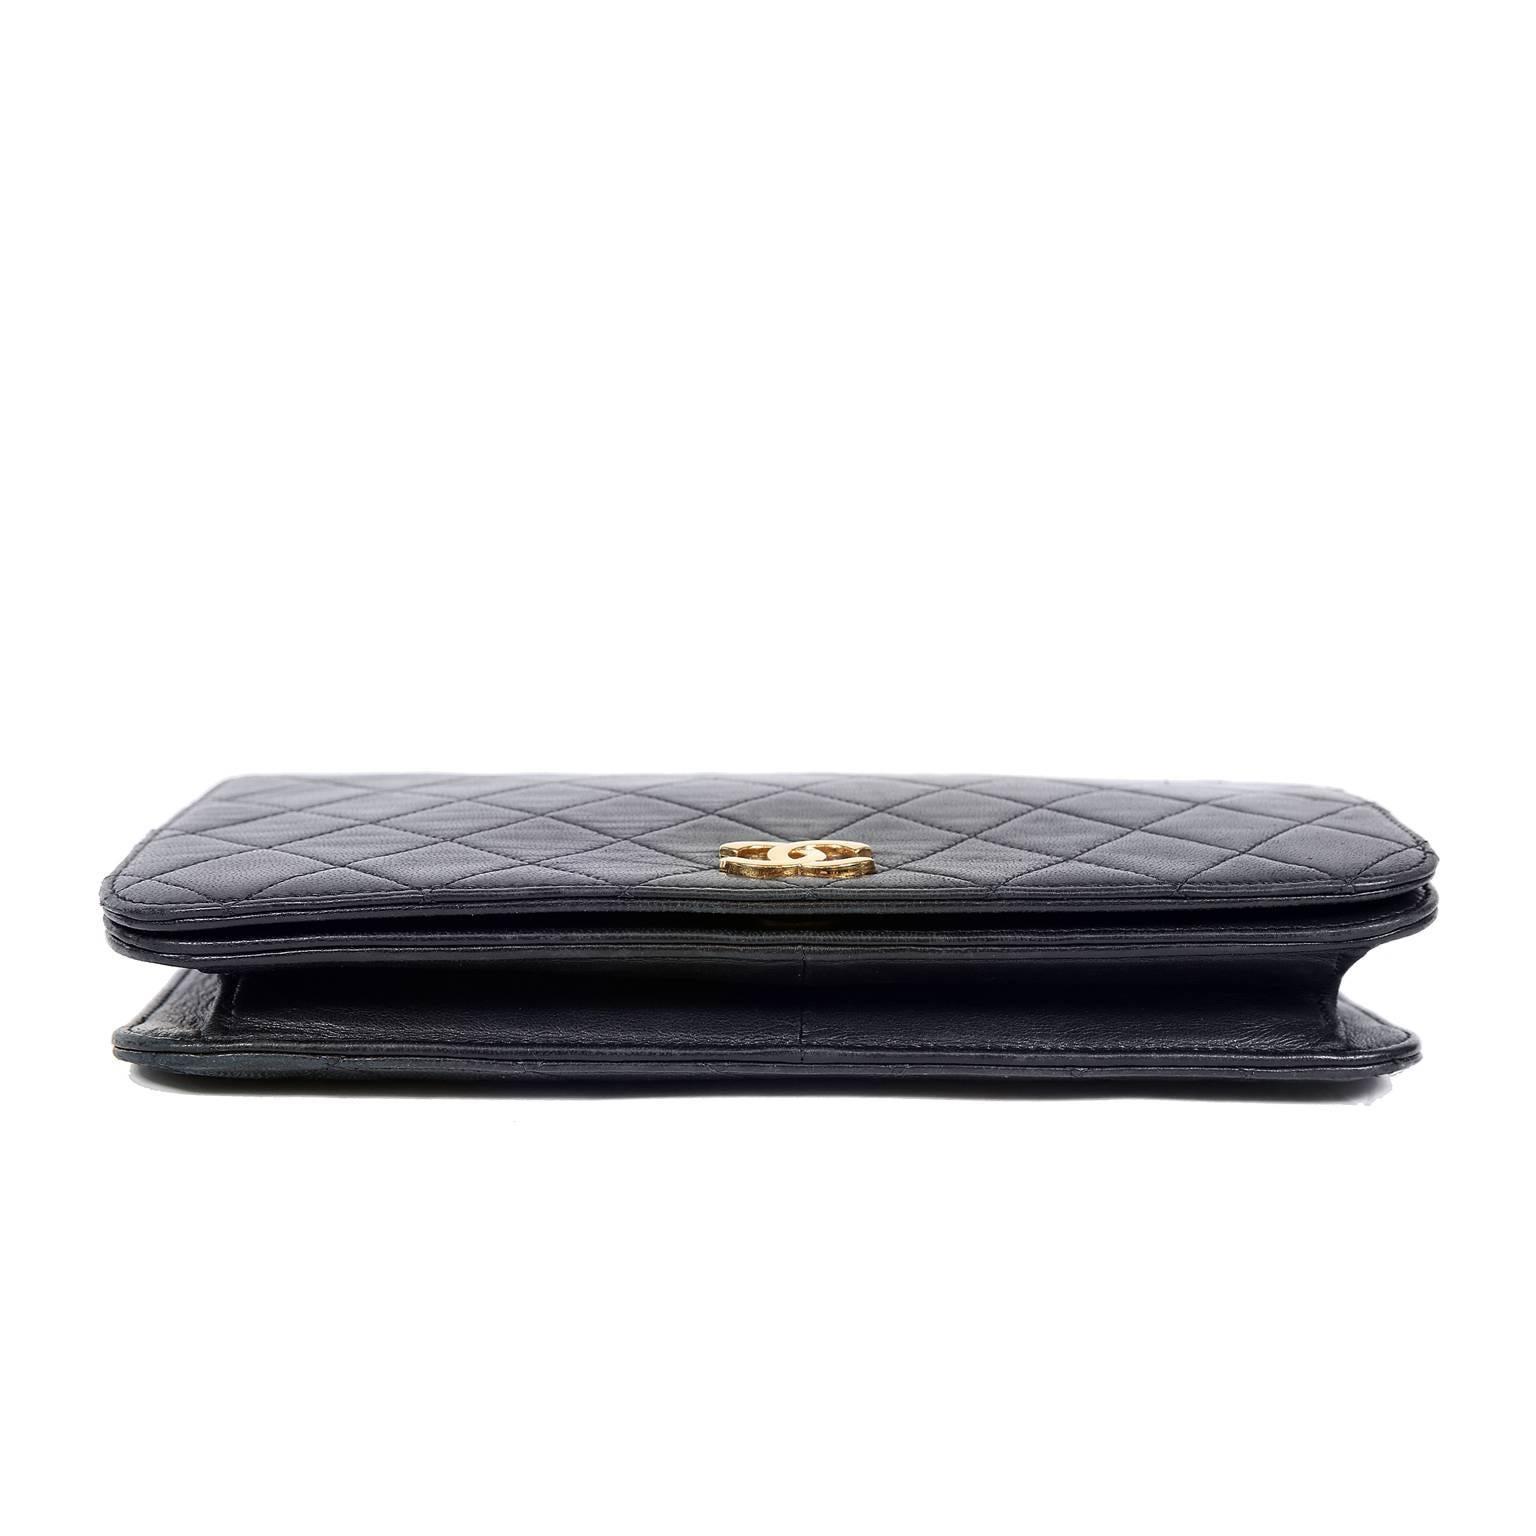 Women's Chanel Black Leather Vintage Clutch with Strap